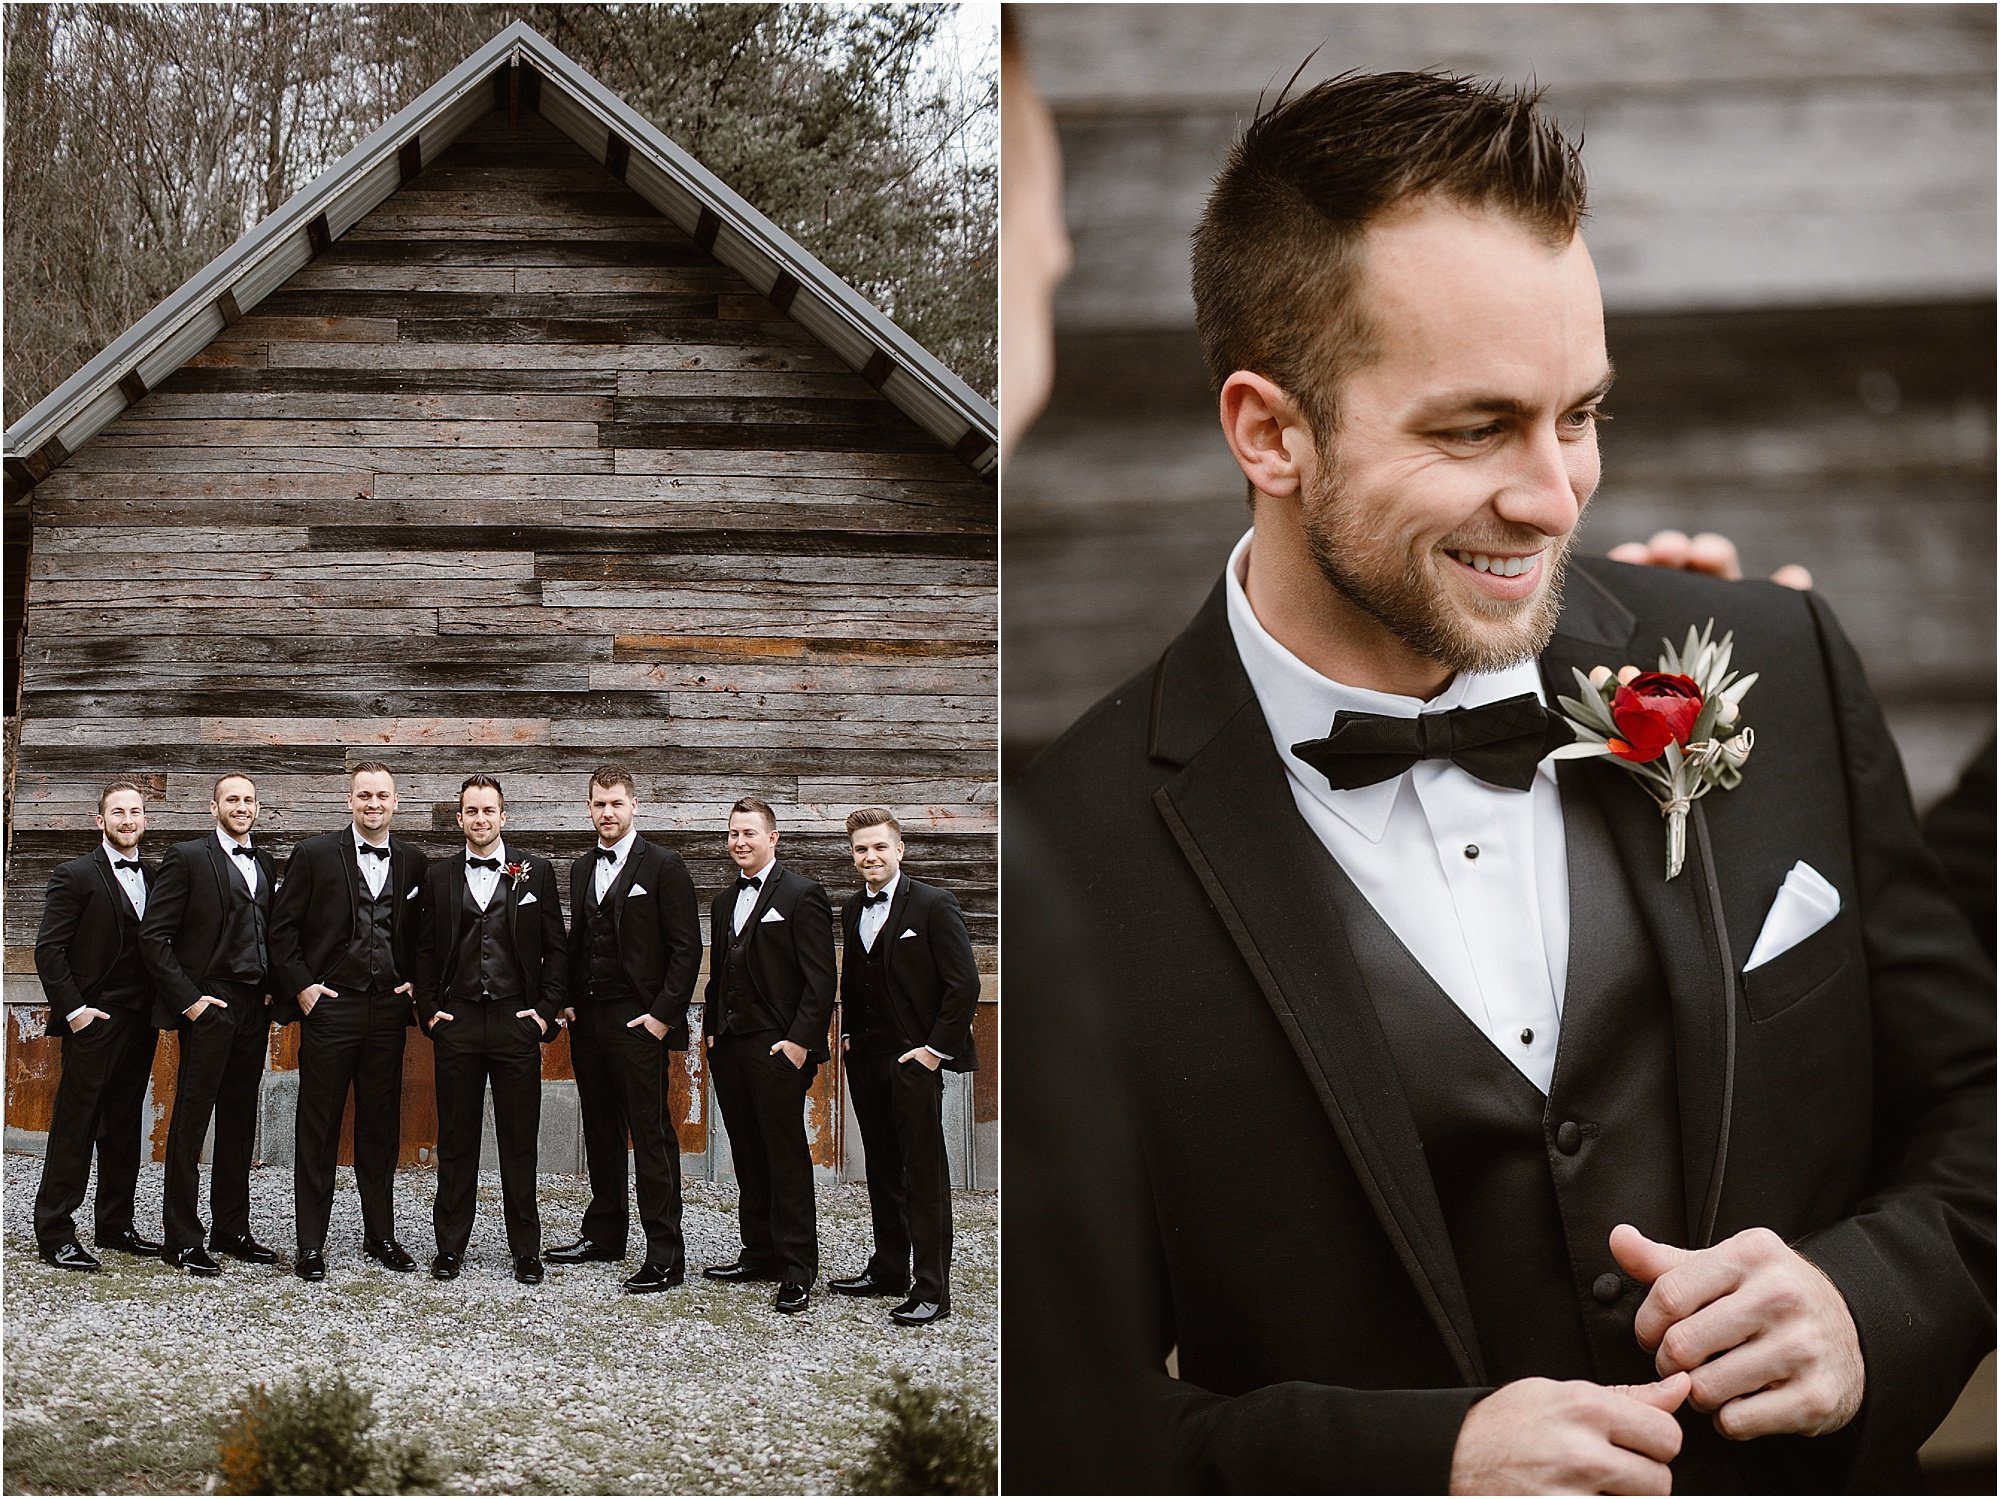 Winter Wedding Venues in Knoxville | Erin Morrison Photography www.erinmorrisonphotography.com